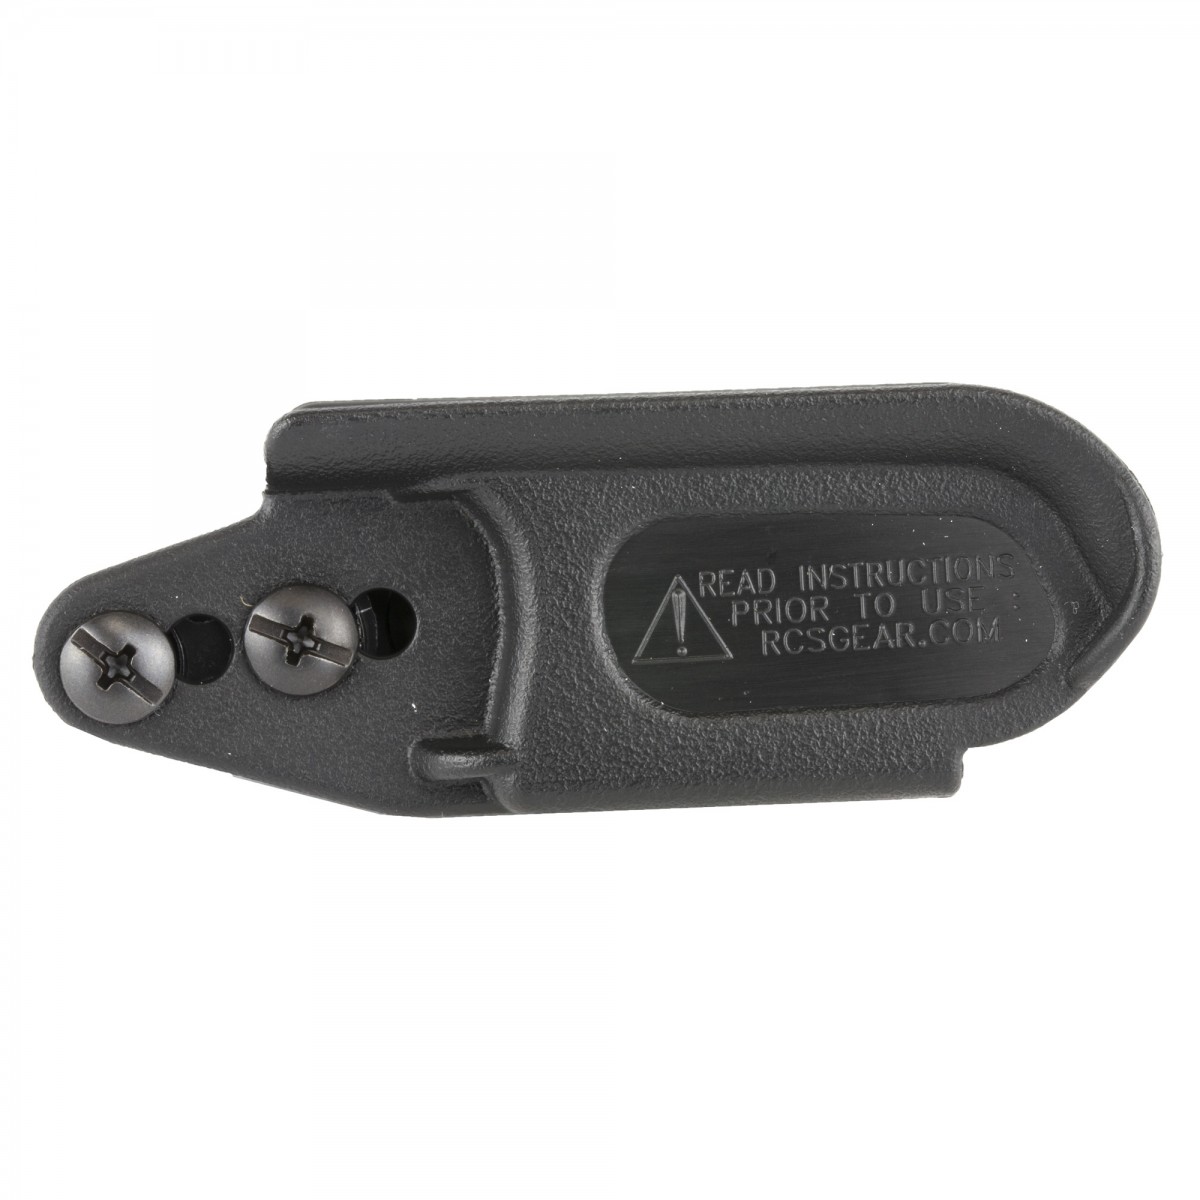 Raven Concealment Systems Vanguard 2 Standard Ambi IWB Holster for ...